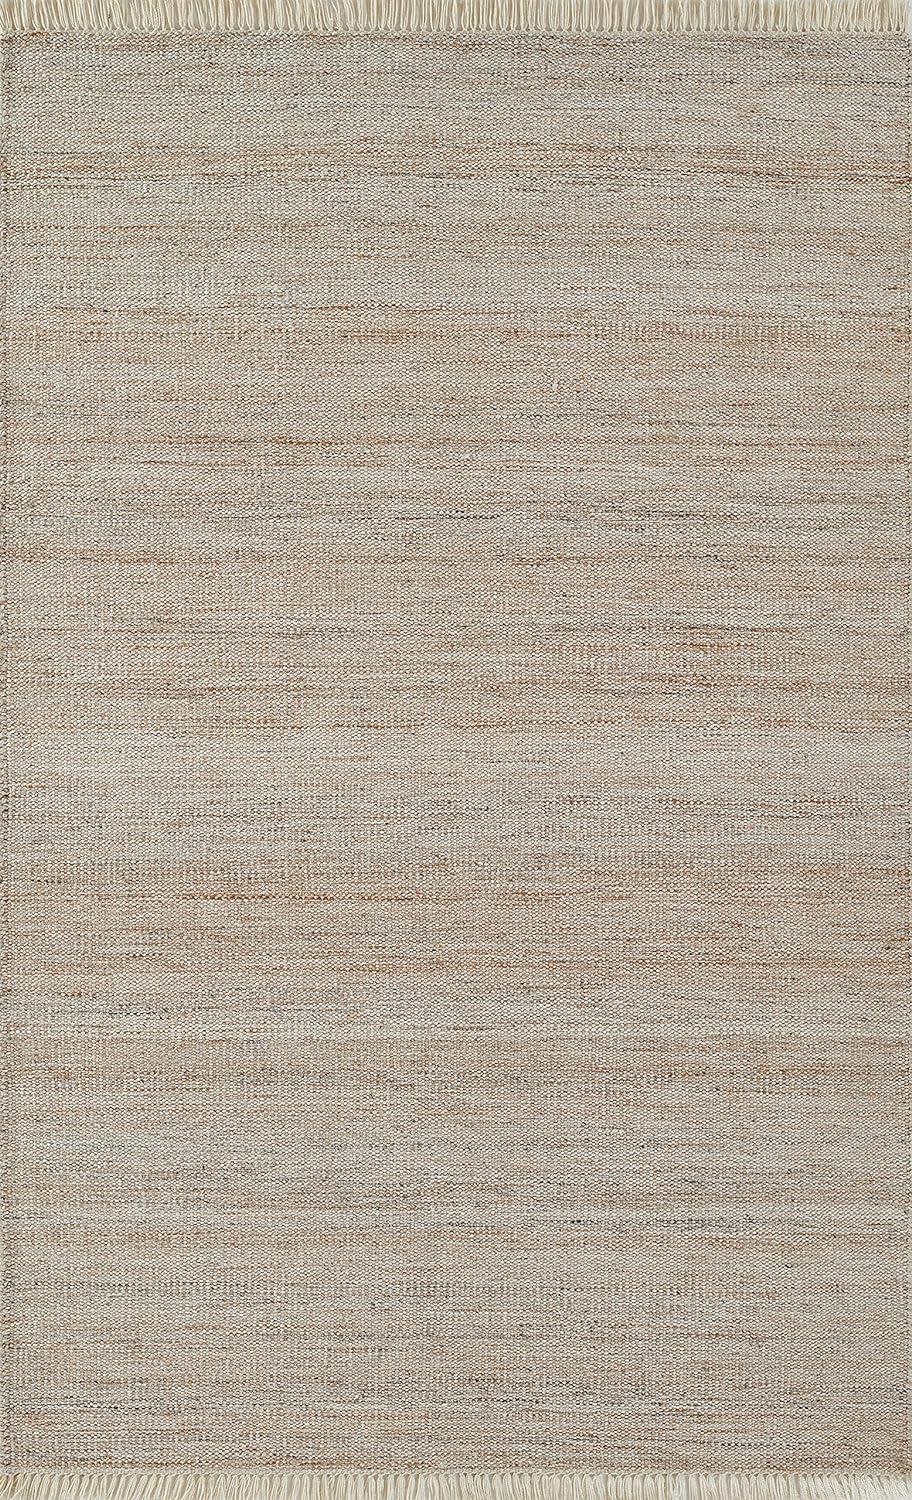 Cove Natural Abstract 8' x 10' Handwoven Indoor/Outdoor Rug